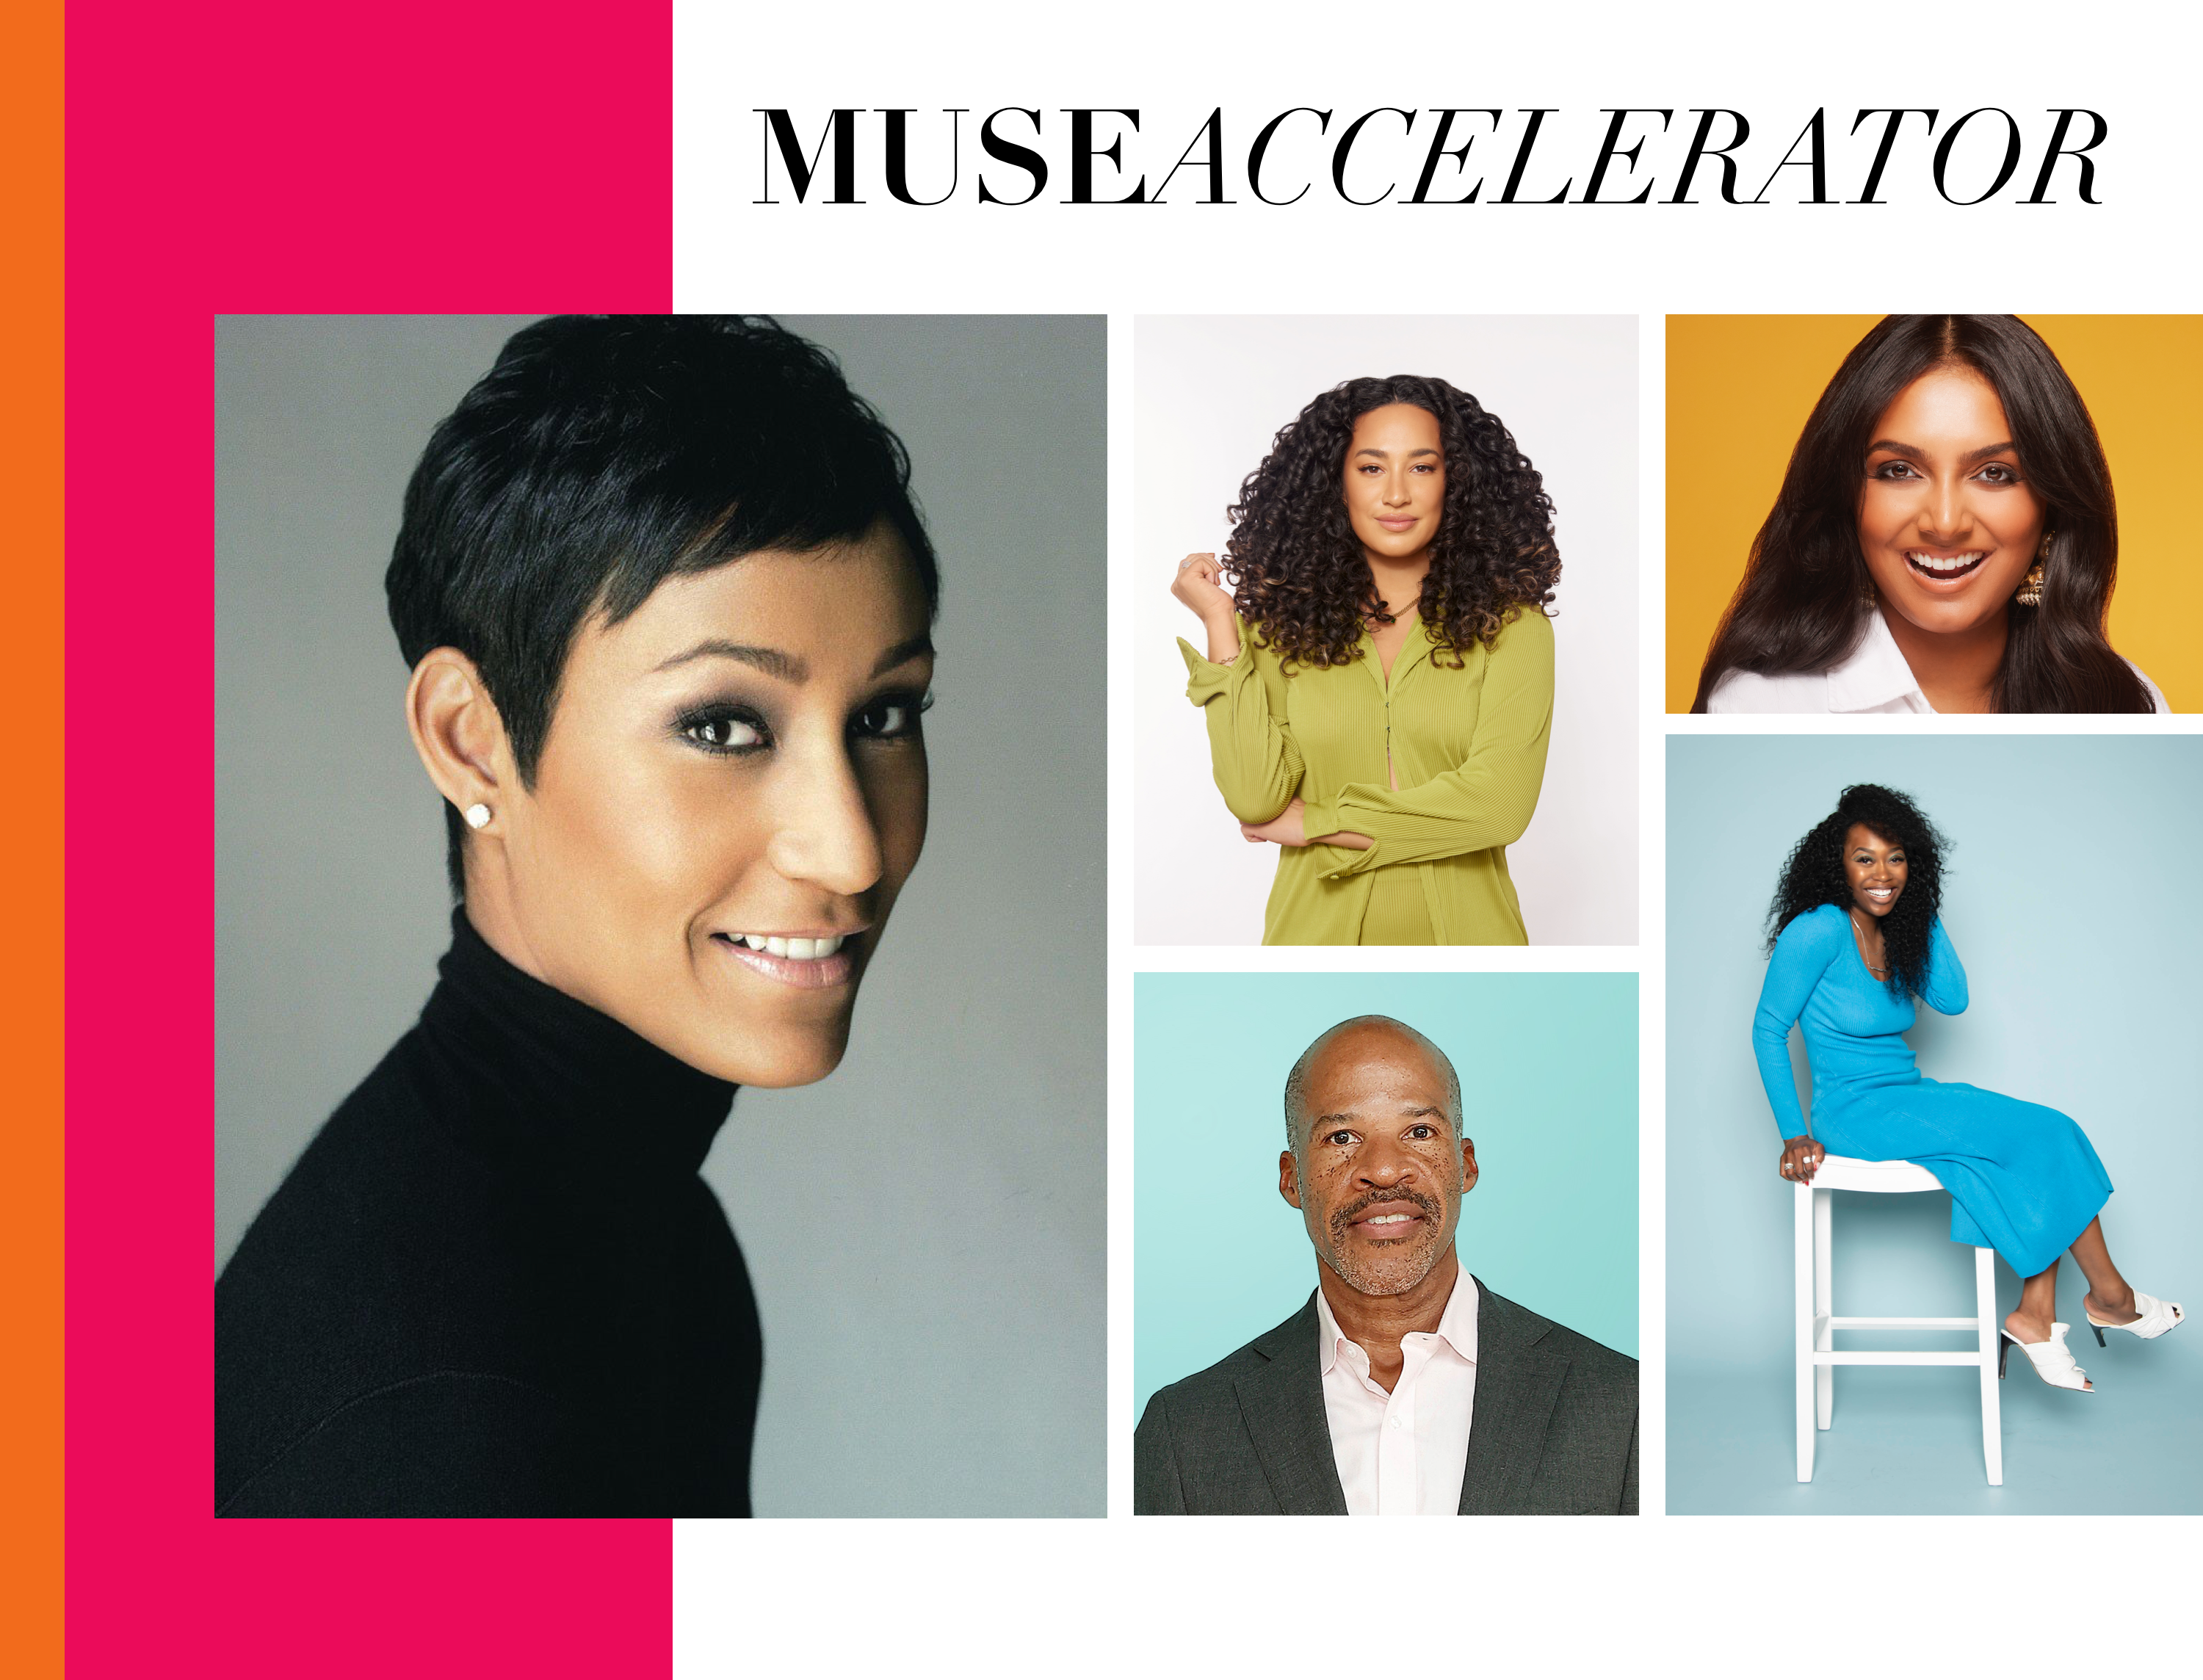 Ulta Beauty Launches MUSE Accelerator To Support Early-Stage BIPOC Founders